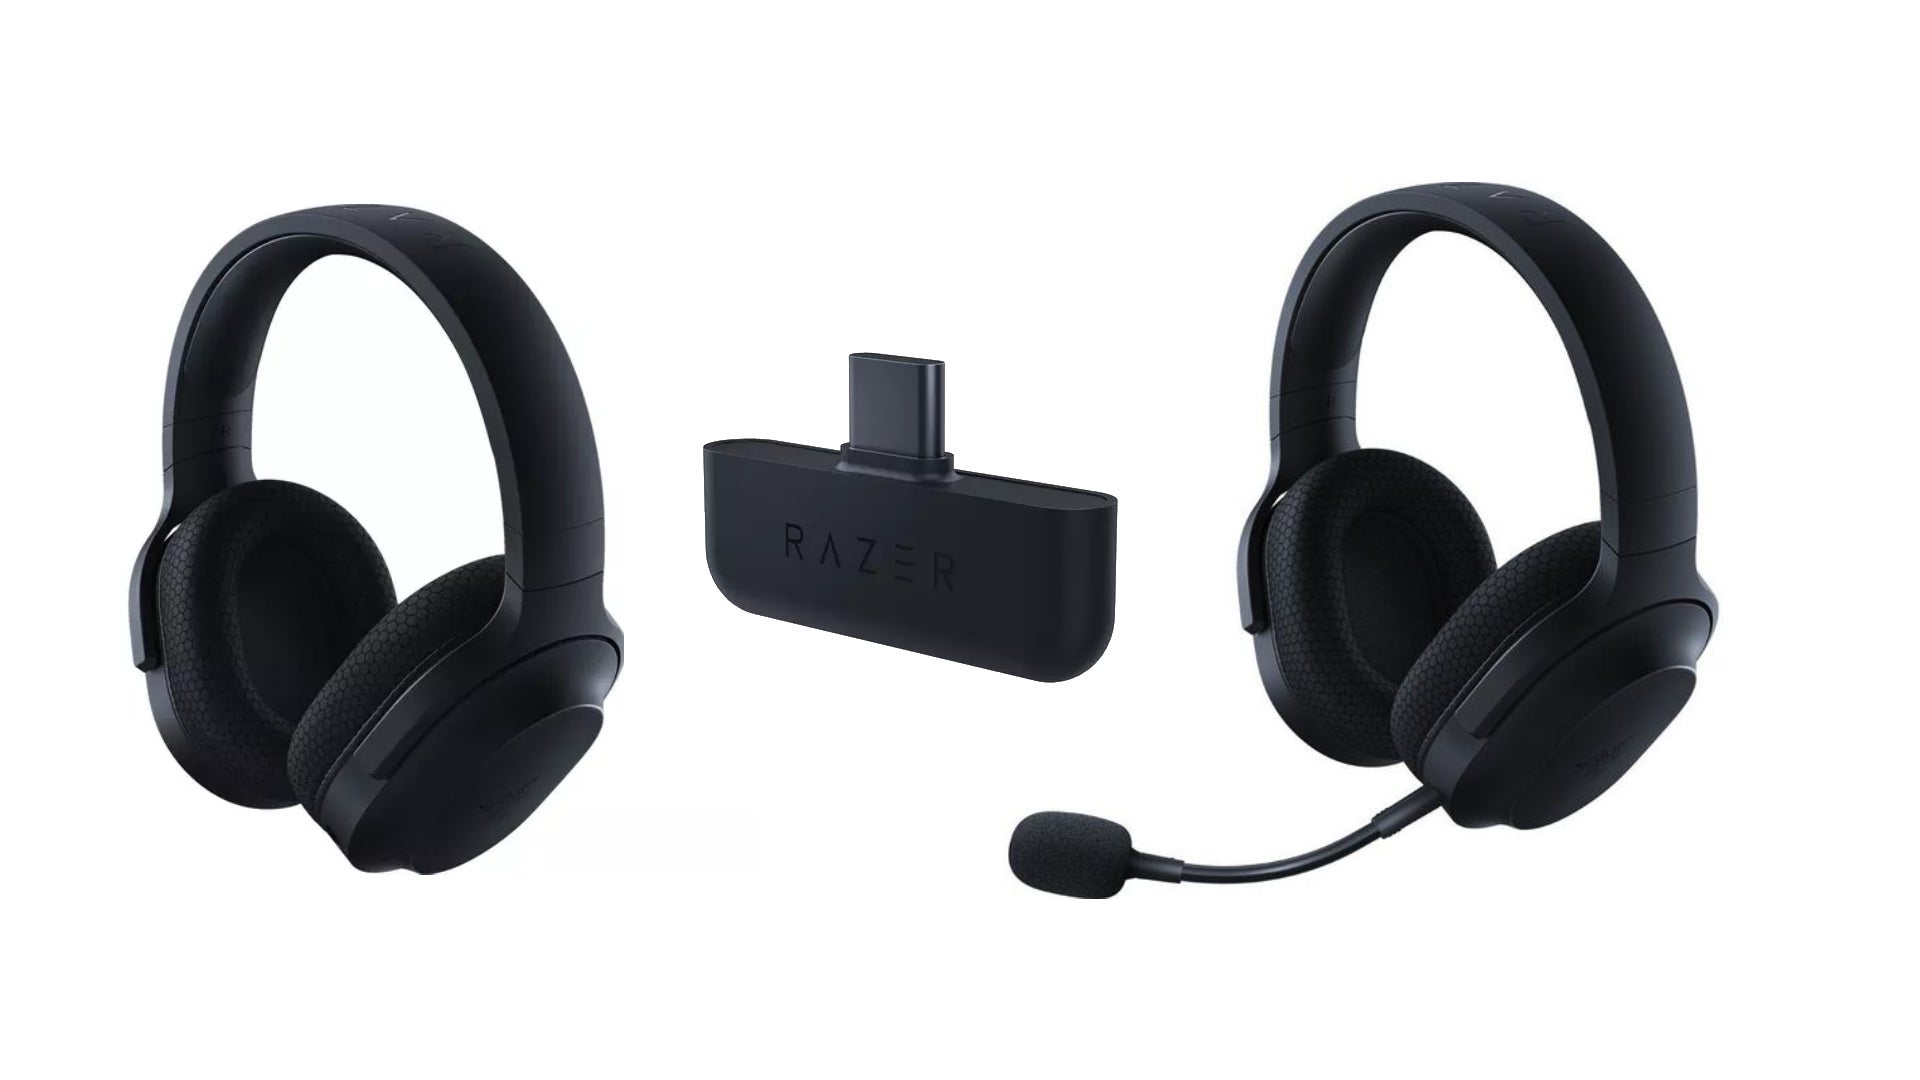 Image for Get a Razer wireless gaming headset for under £50